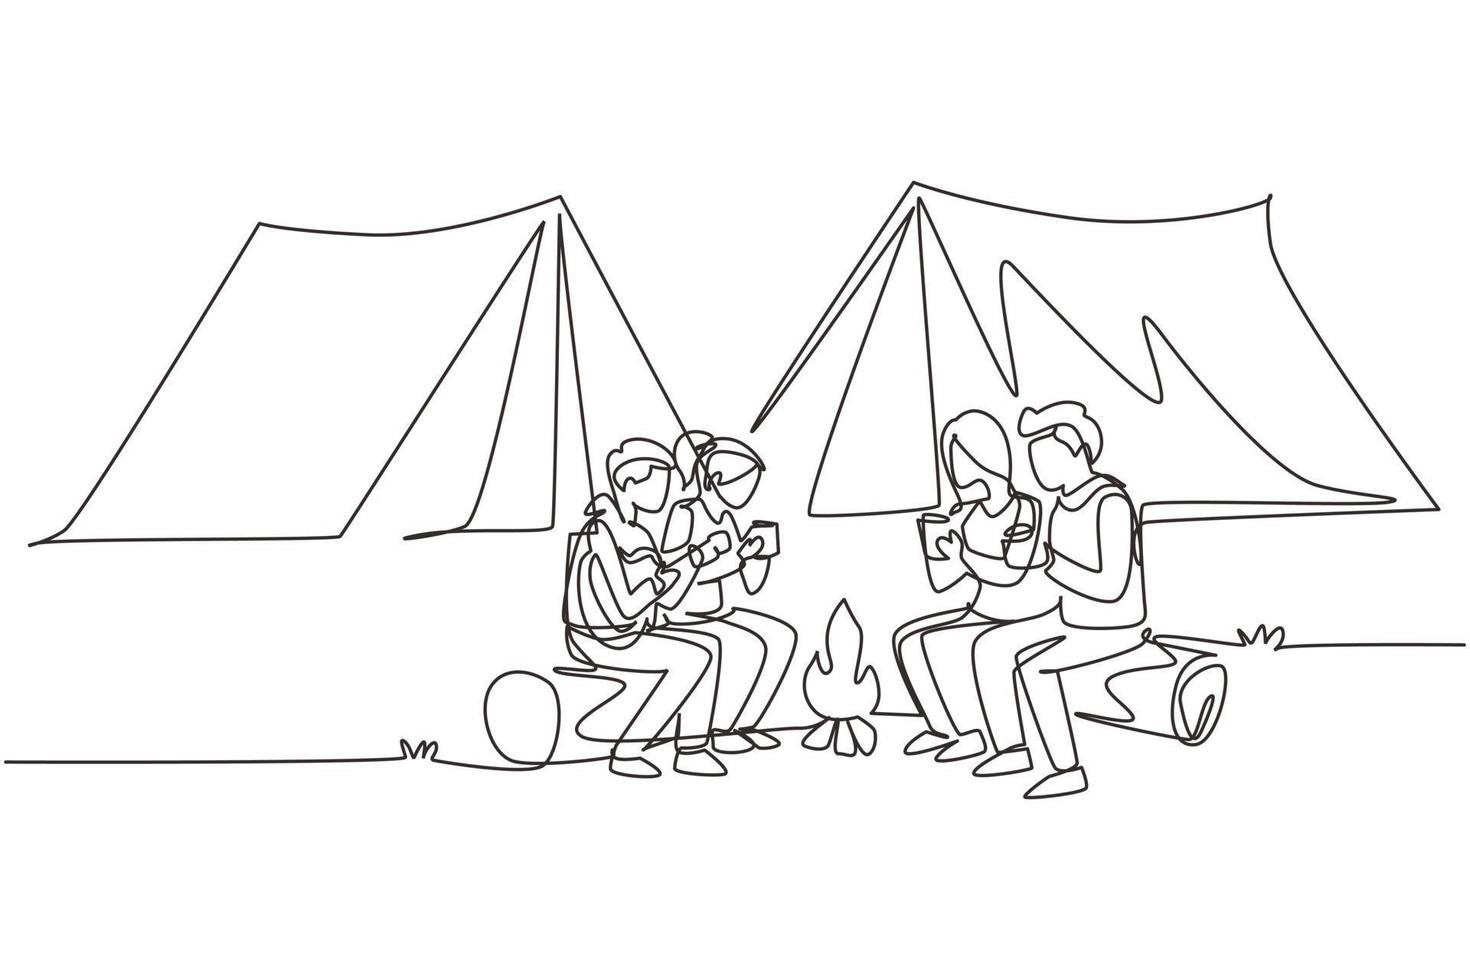 Continuous one line drawing two pair man and woman getting warm near bonfire. Group of people camping drinking tea sitting on logs and man playing guitar. Single line draw design vector illustration